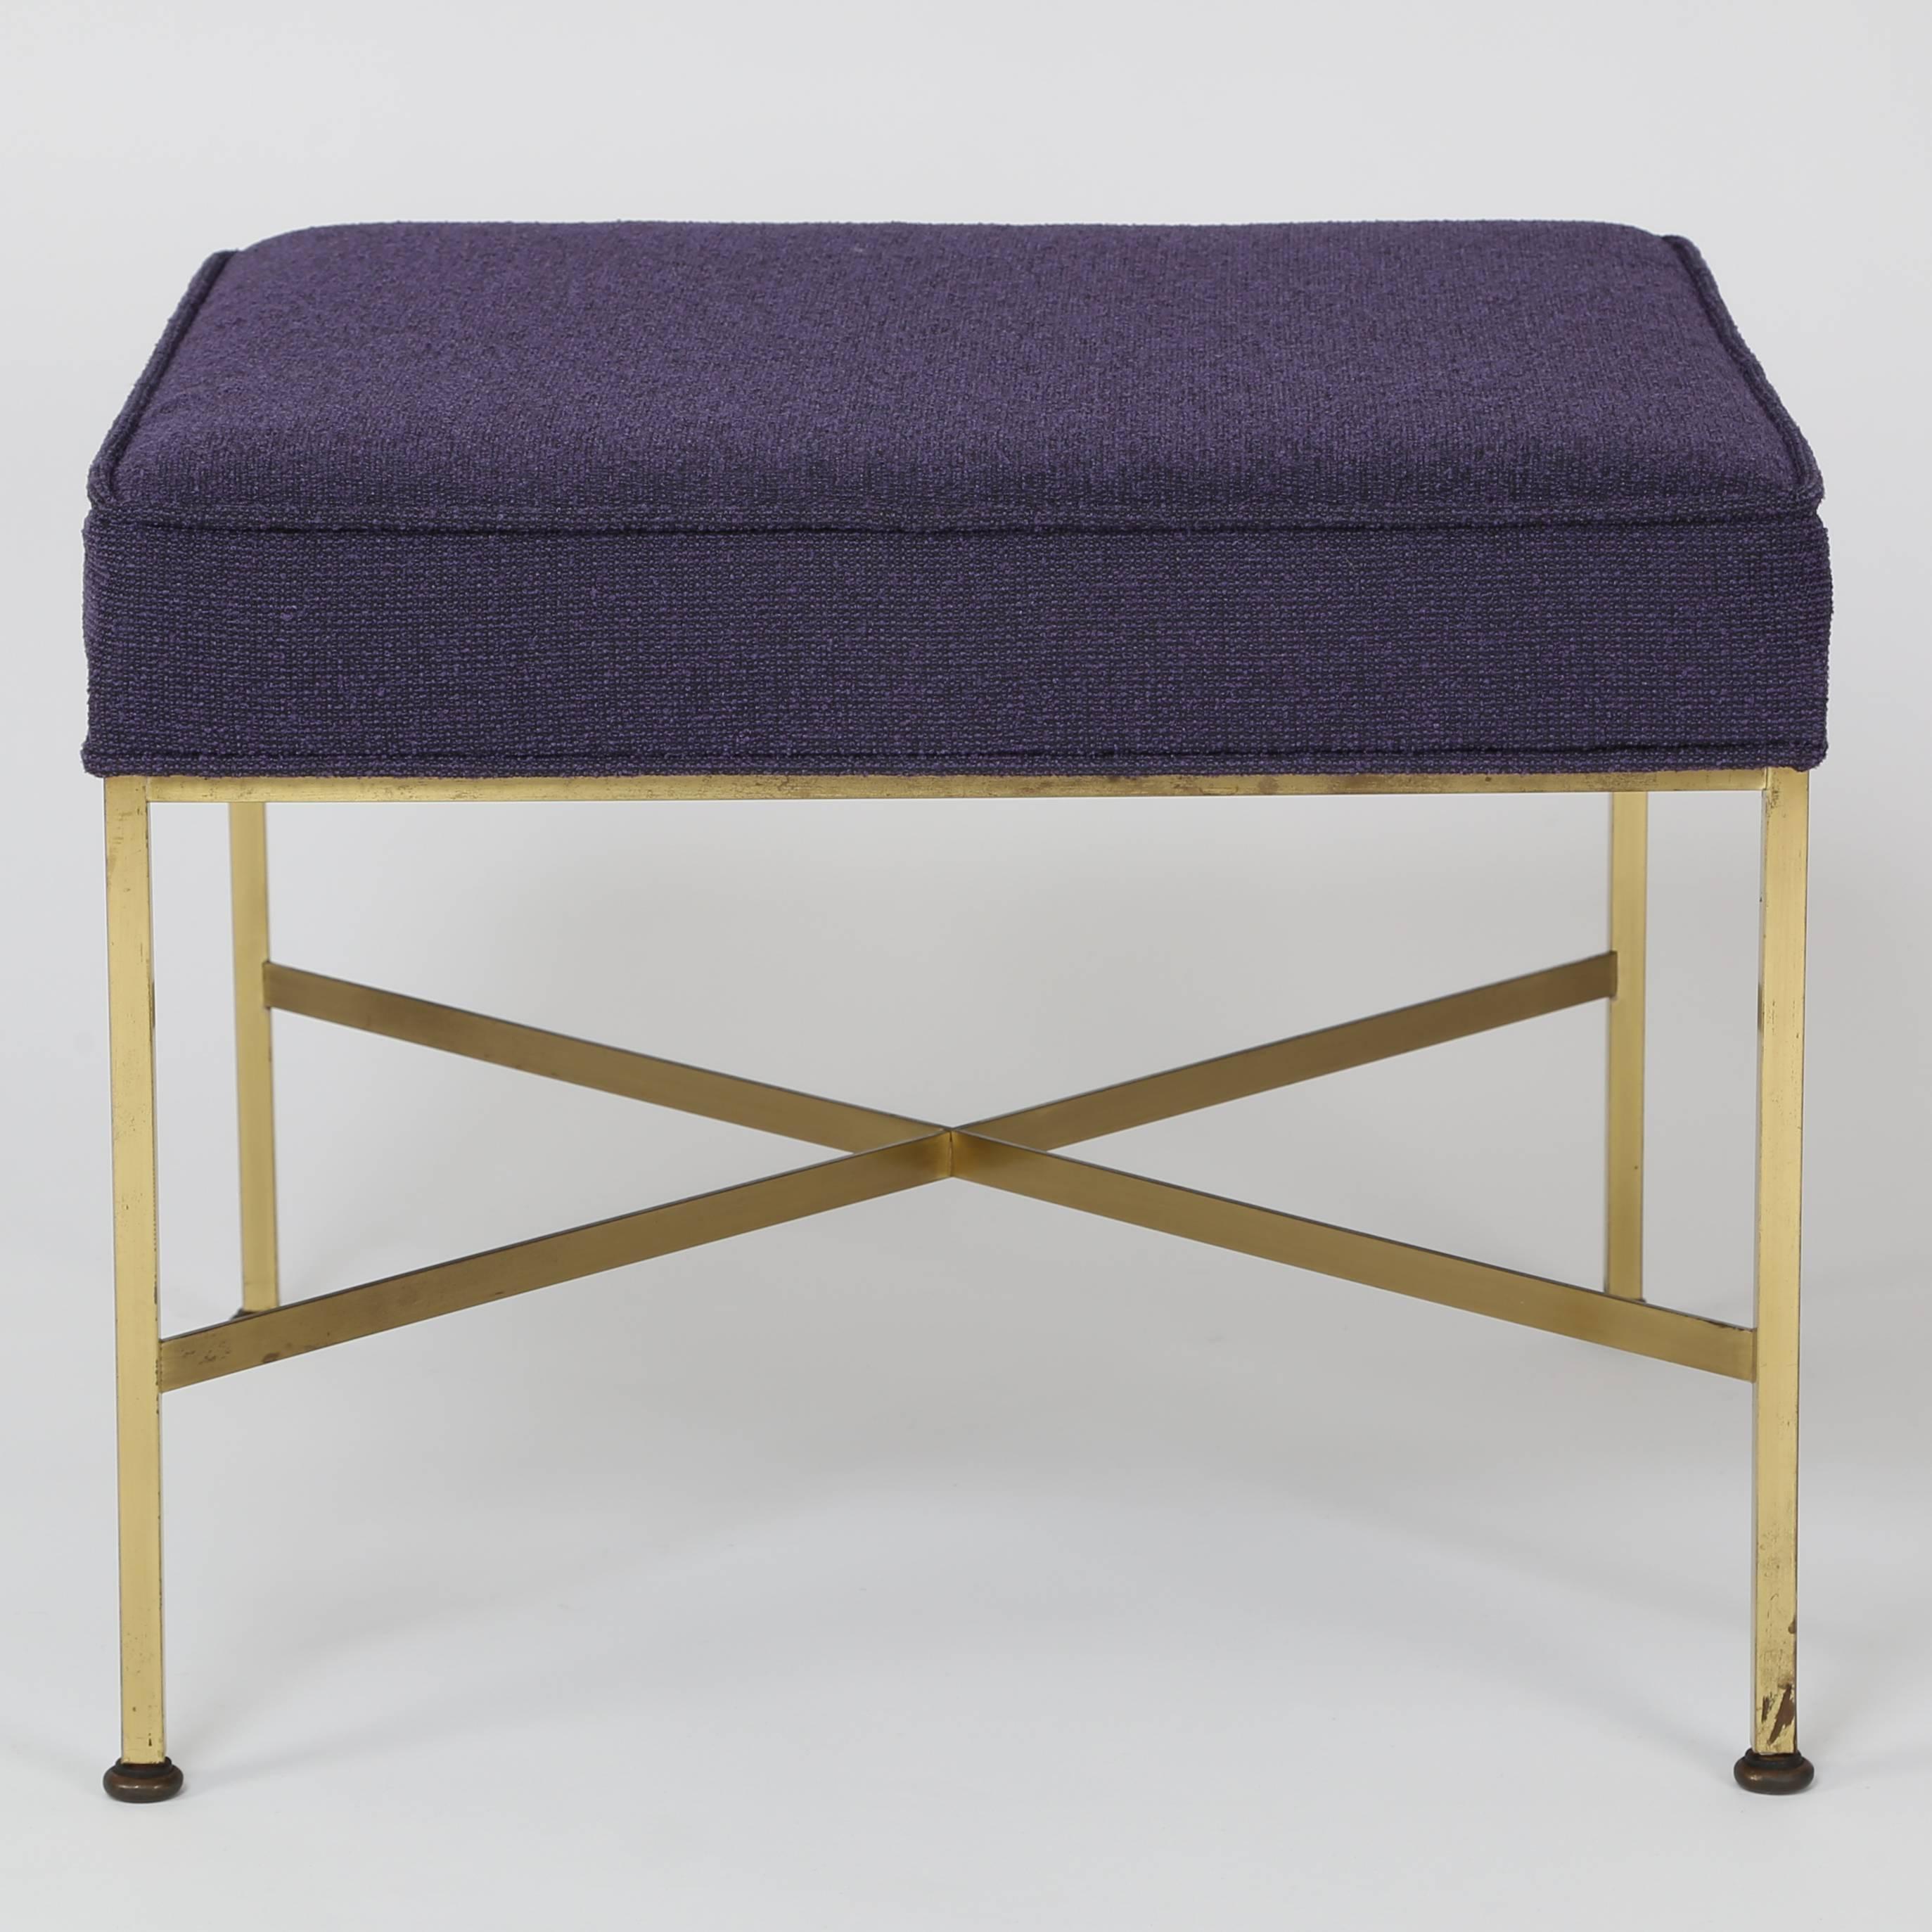 Paul McCobb for Calvin X-base stool with square tubular brass legs, flat brass stretchers and as-found woven eggplant upholstery in good condition. This item is in our Brooklyn showroom.